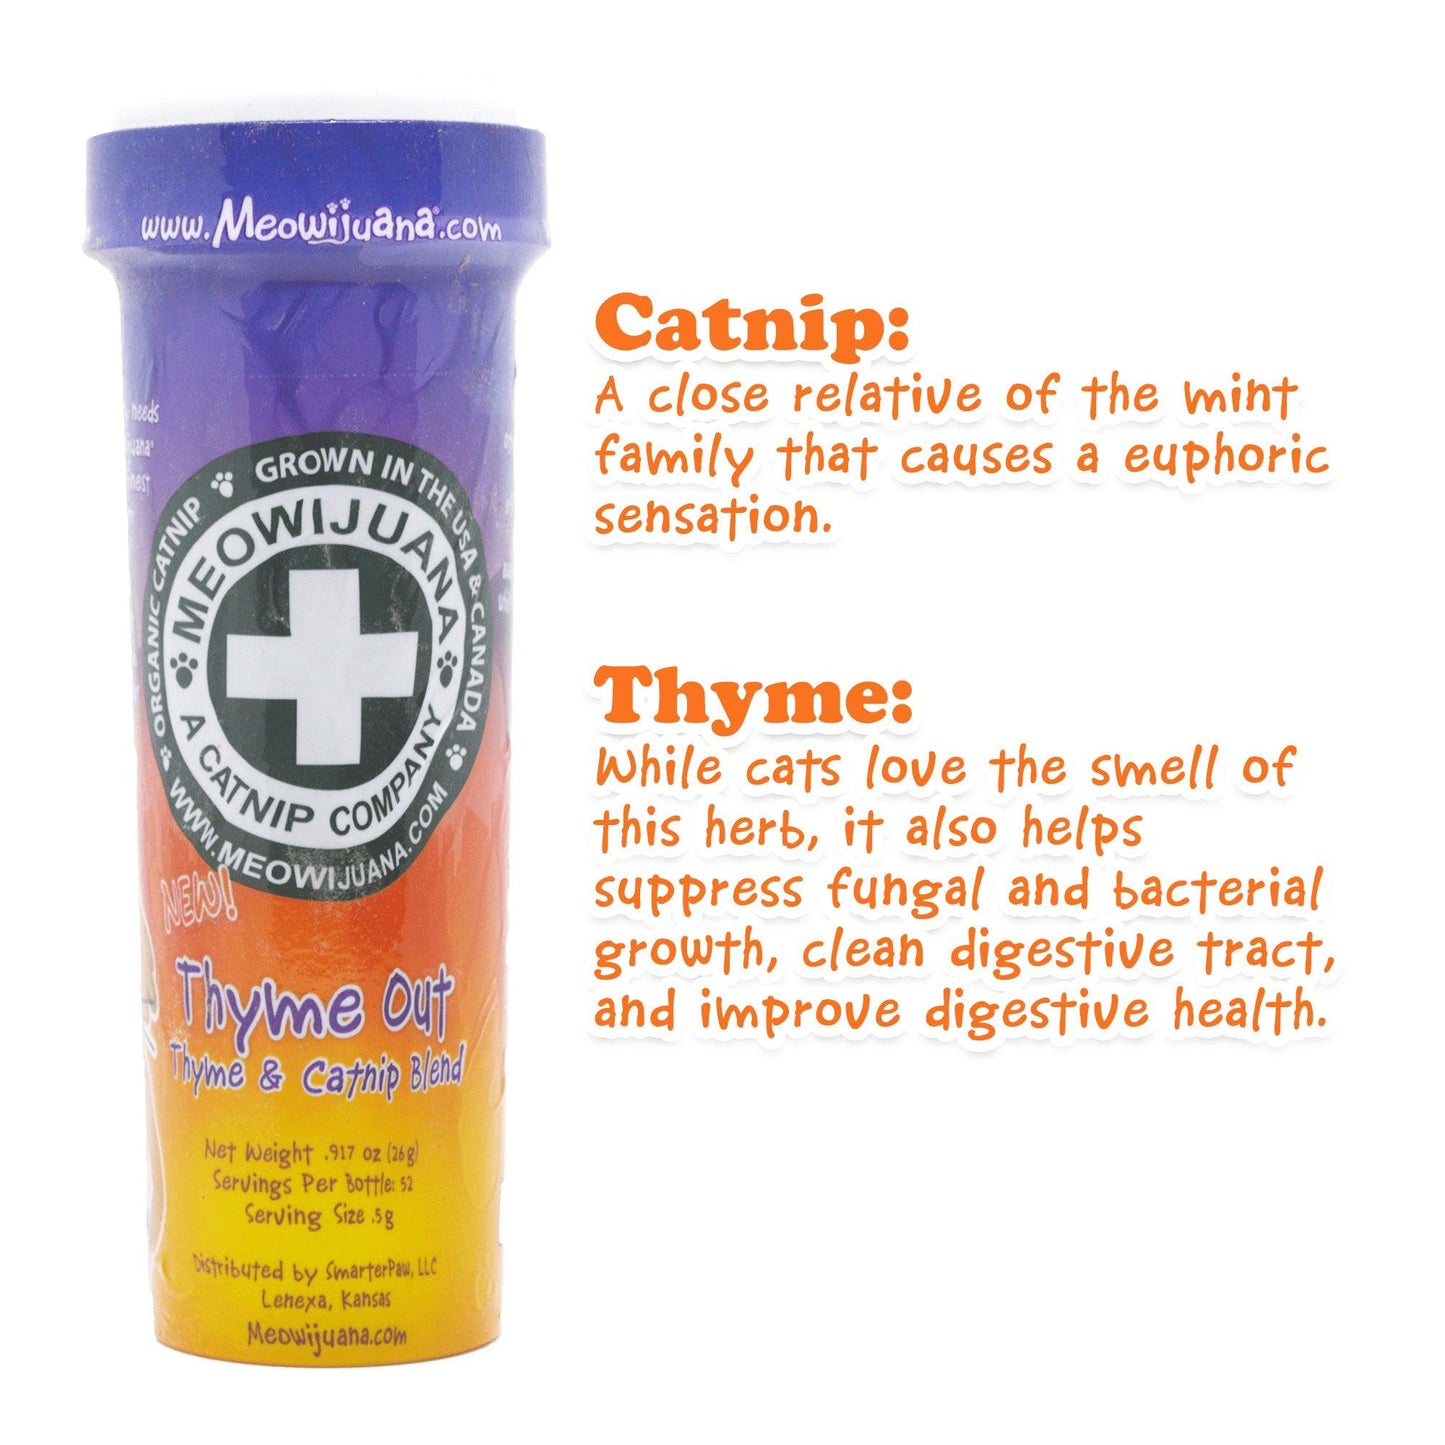 Thyme Out - Thyme & Catnip Blend